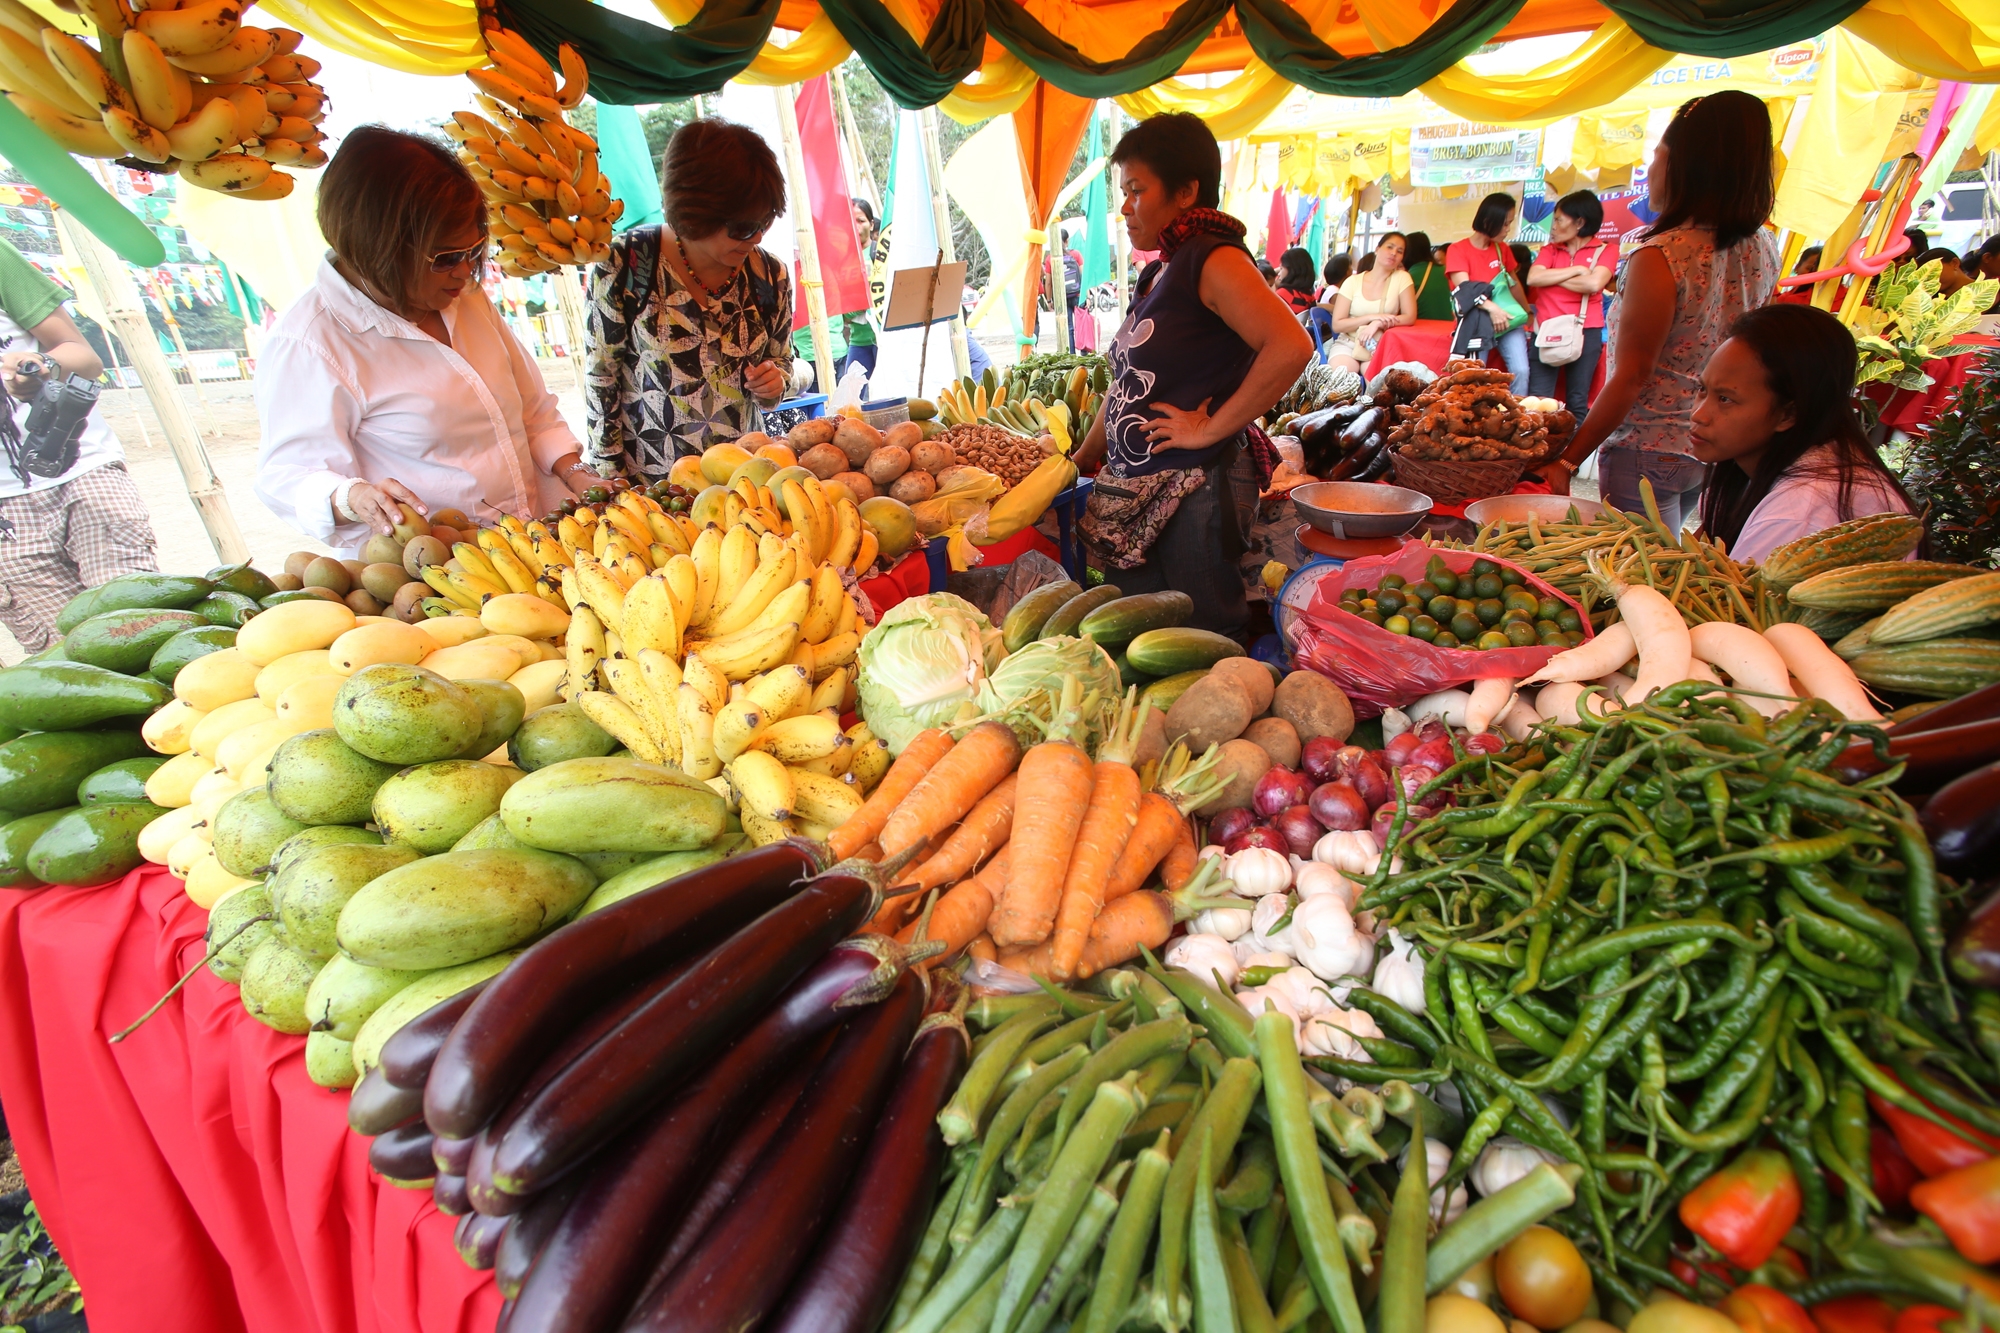 Cebu City's mountain barangay's offer low-priced fruits, vegetables and flowers (above) in this file photo taken during the Pahugyaw sa Kabukiran festival. The tourism commission, headed by Tetta Baad (left), plans to put up a Farmers' Market as part of a new tour package.(CDN FILE PHOTO)